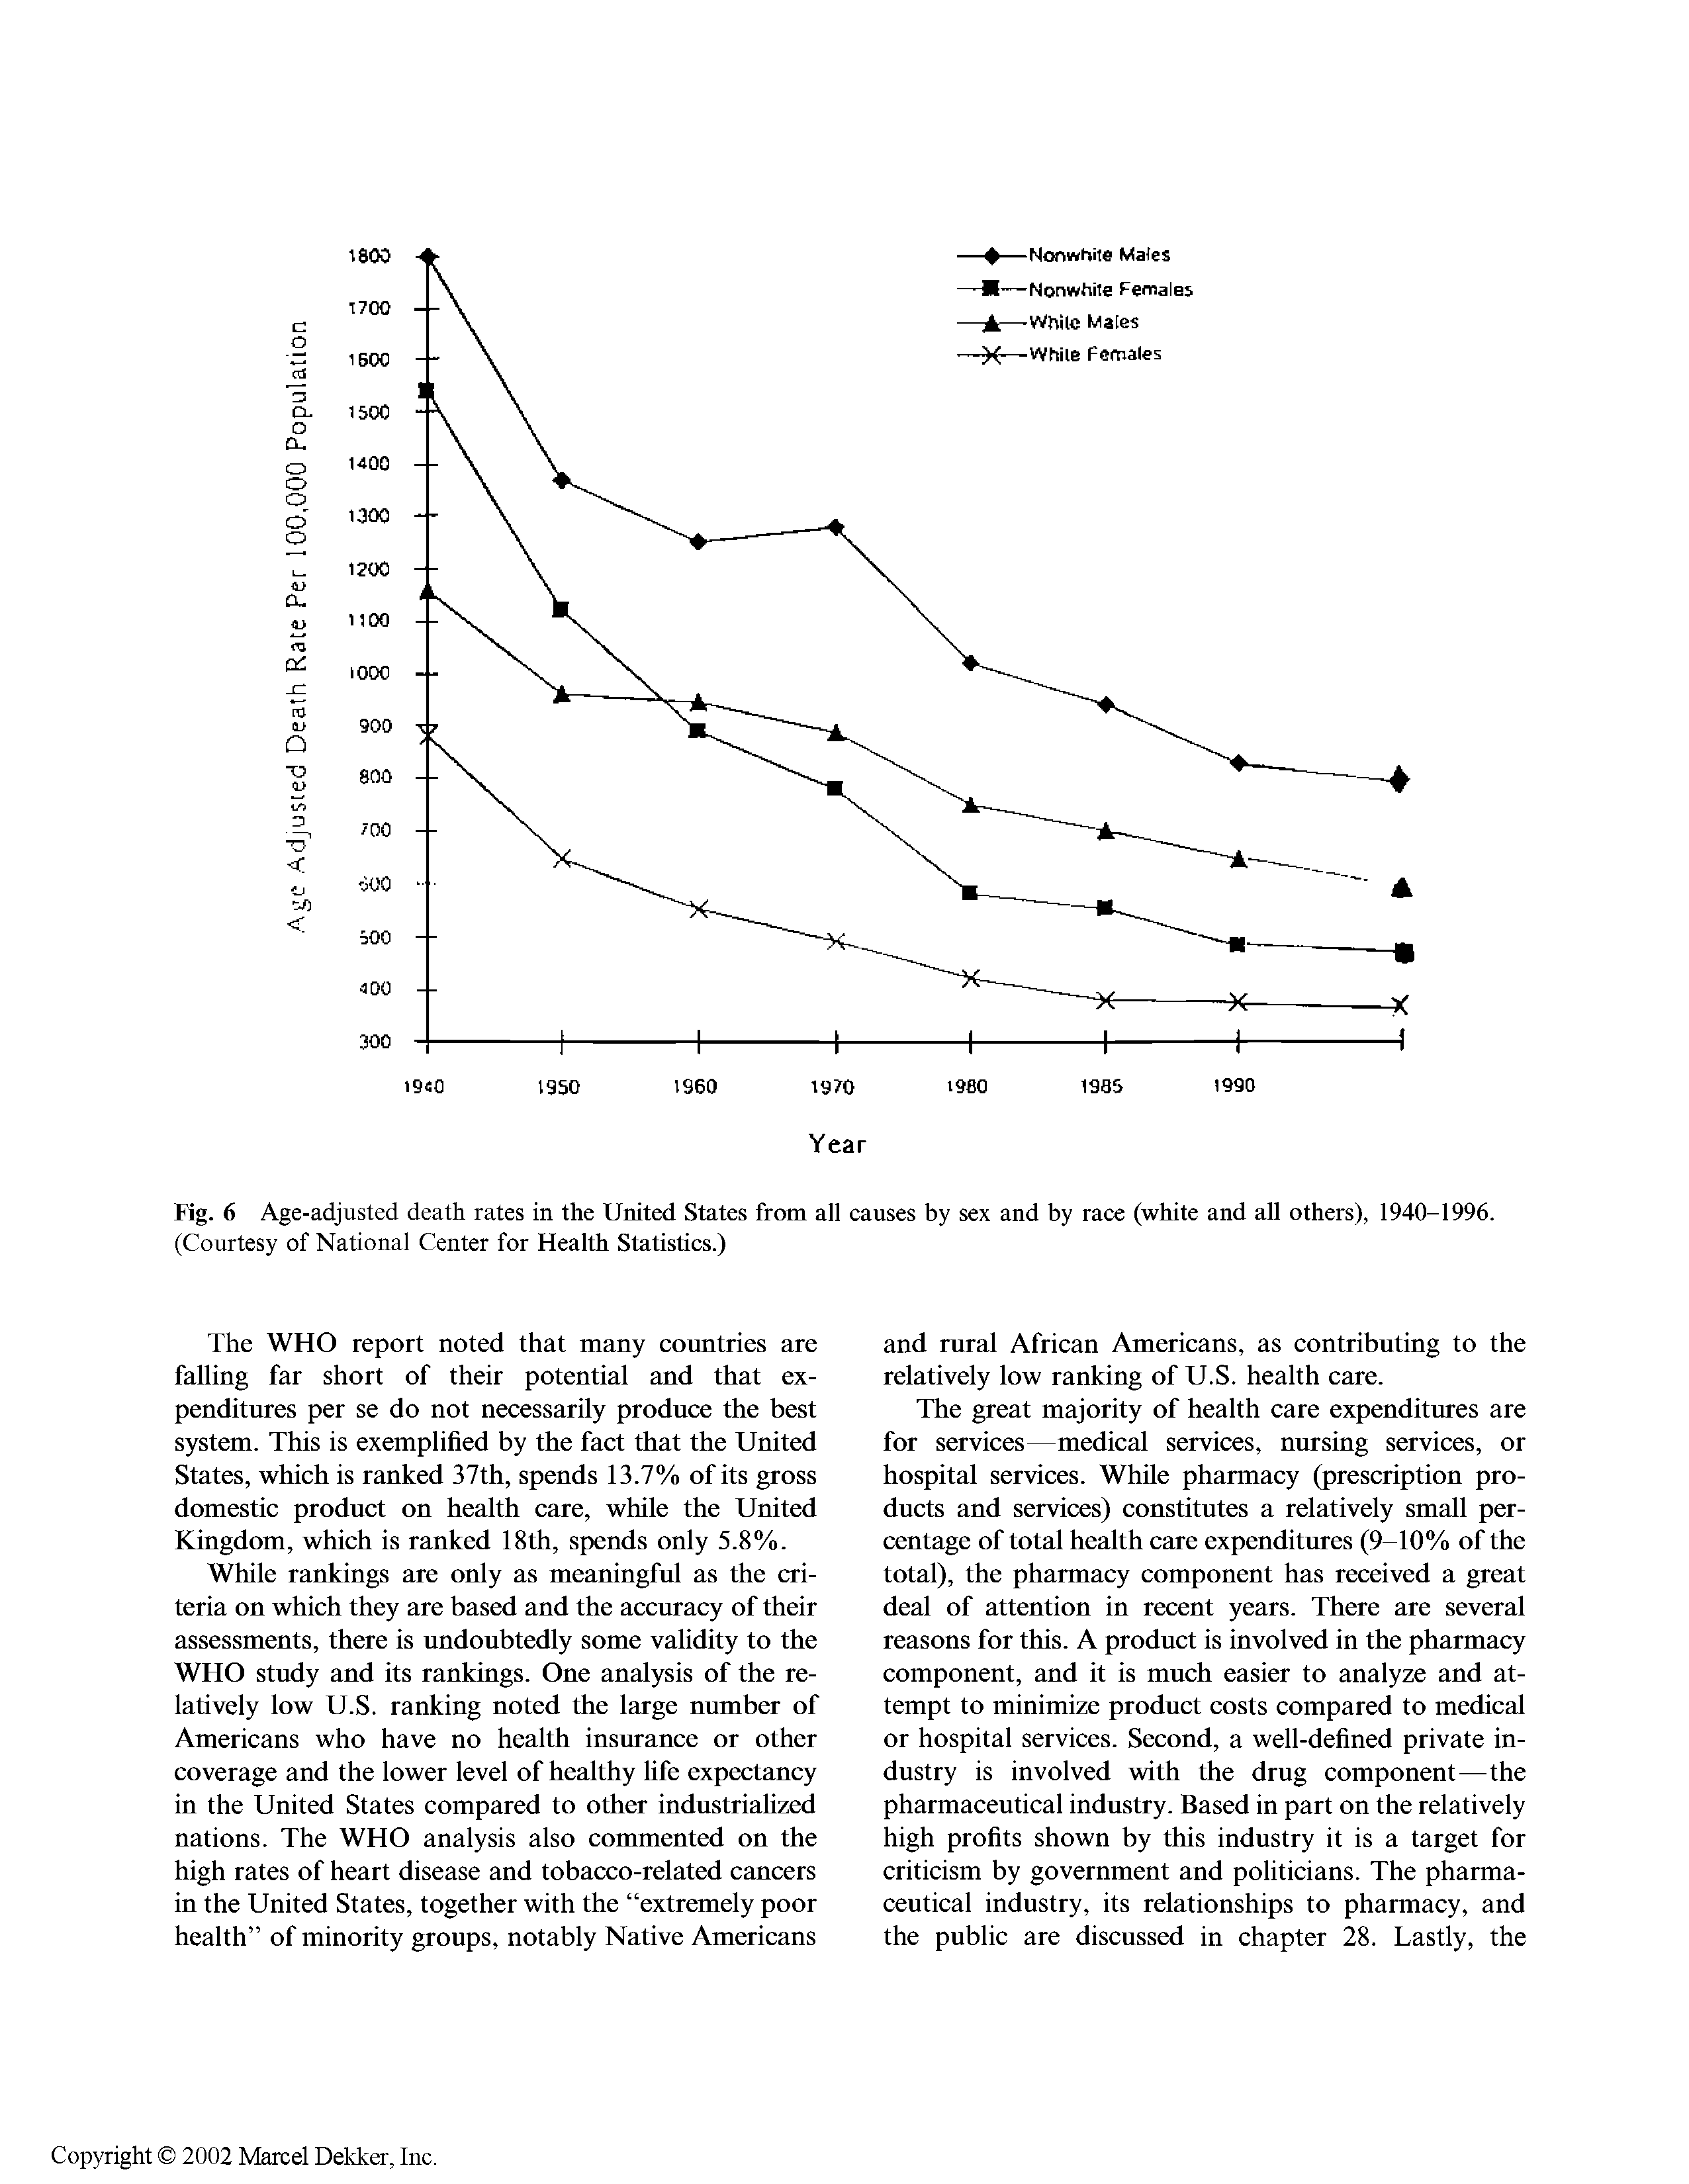 Fig. 6 Age-adjusted death rates in the United States from all causes by sex and by race (white and all others), 1940-1996. (Courtesy of National Center for Health Statistics.)...